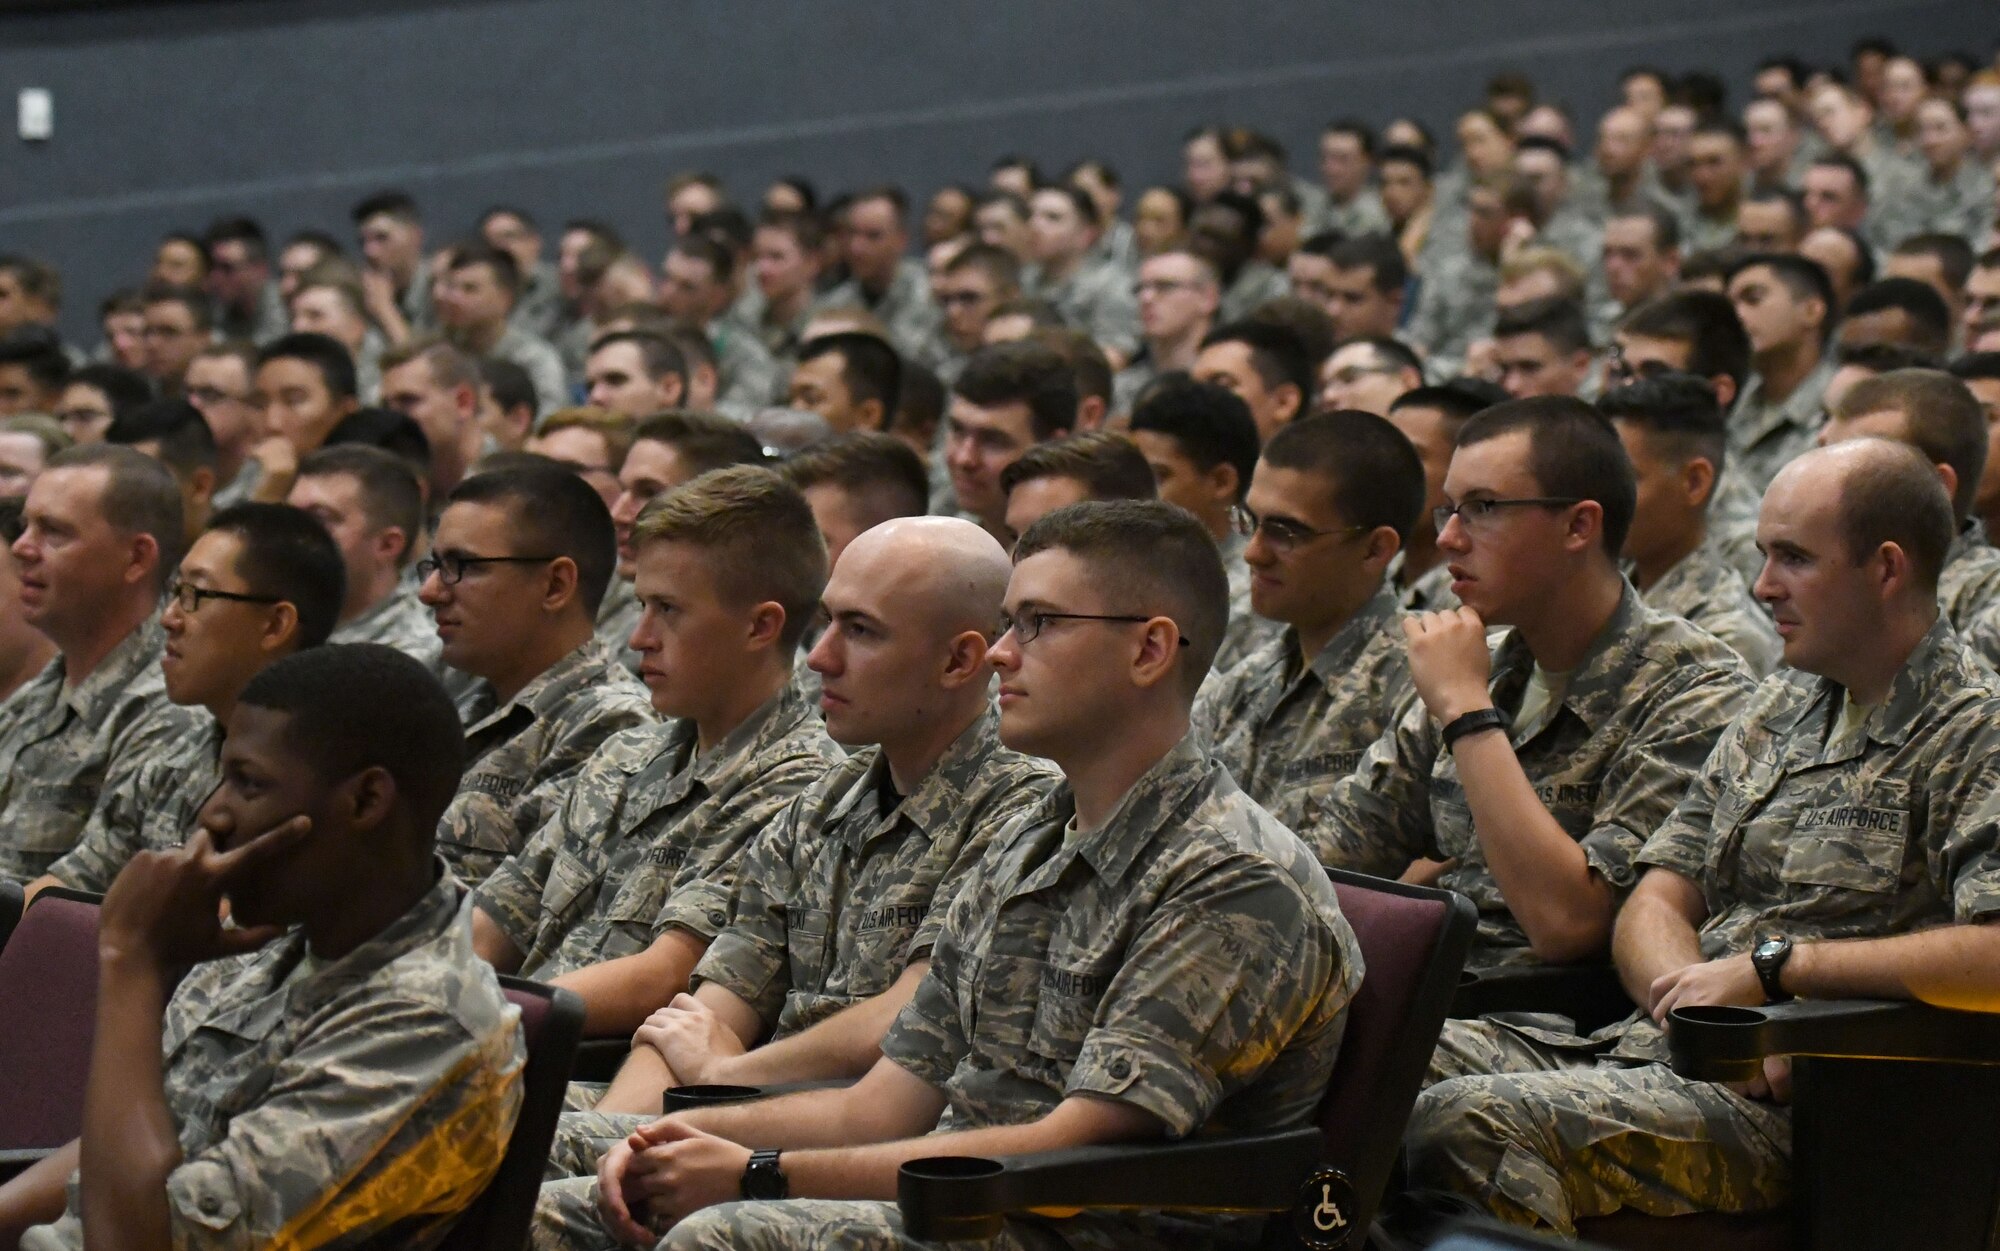 81st Training Group Airmen attend a speaking engagement by U.S. Air Force Senior Master Sgt. Israel Del Toro, 98th Flying Training Squadron accelerated freefall training program superintendent, U.S. Air Force Academy, Colorado, at the Welch Theater at Keesler Air Force Base, Mississippi, Sept. 21, 2018. Del Toro was injured in Afghanistan on Dec. 4, 2005, and became the first 100 percent disabled Airman to reenlist in the Air Force on Feb. 8, 2010. He also received the first field promotion in the Air Force. (U.S. Air Force photo by Kemberly Groue)